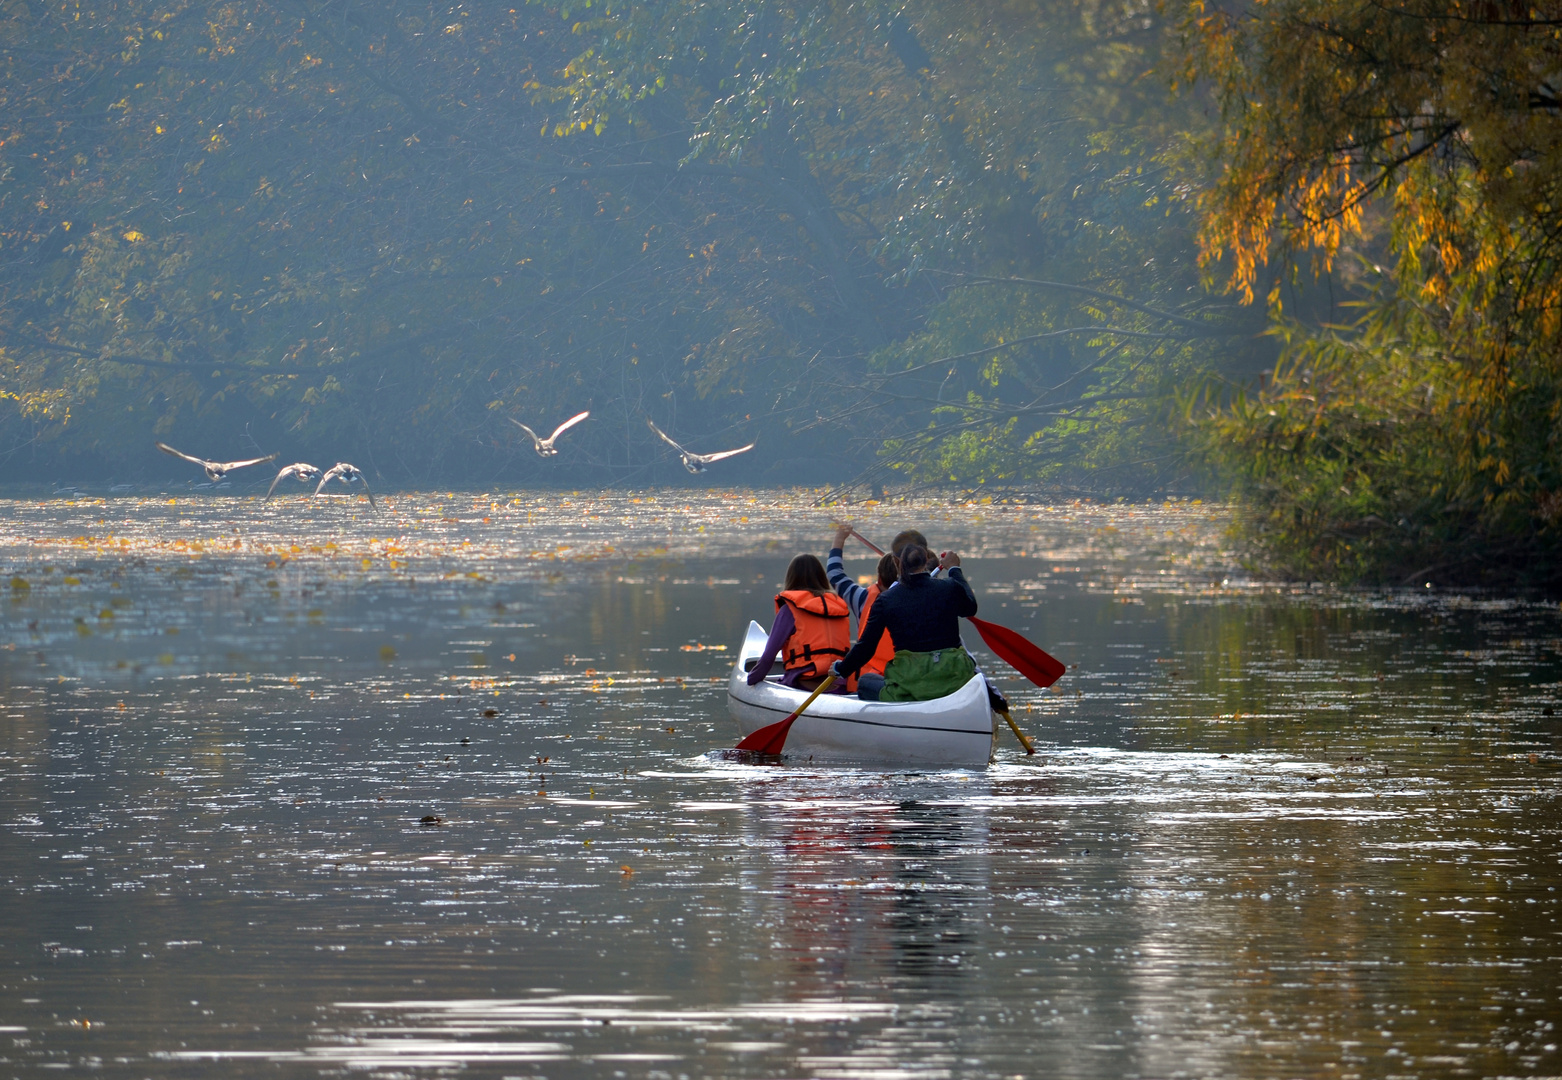 BOATING IN FALL WATERS